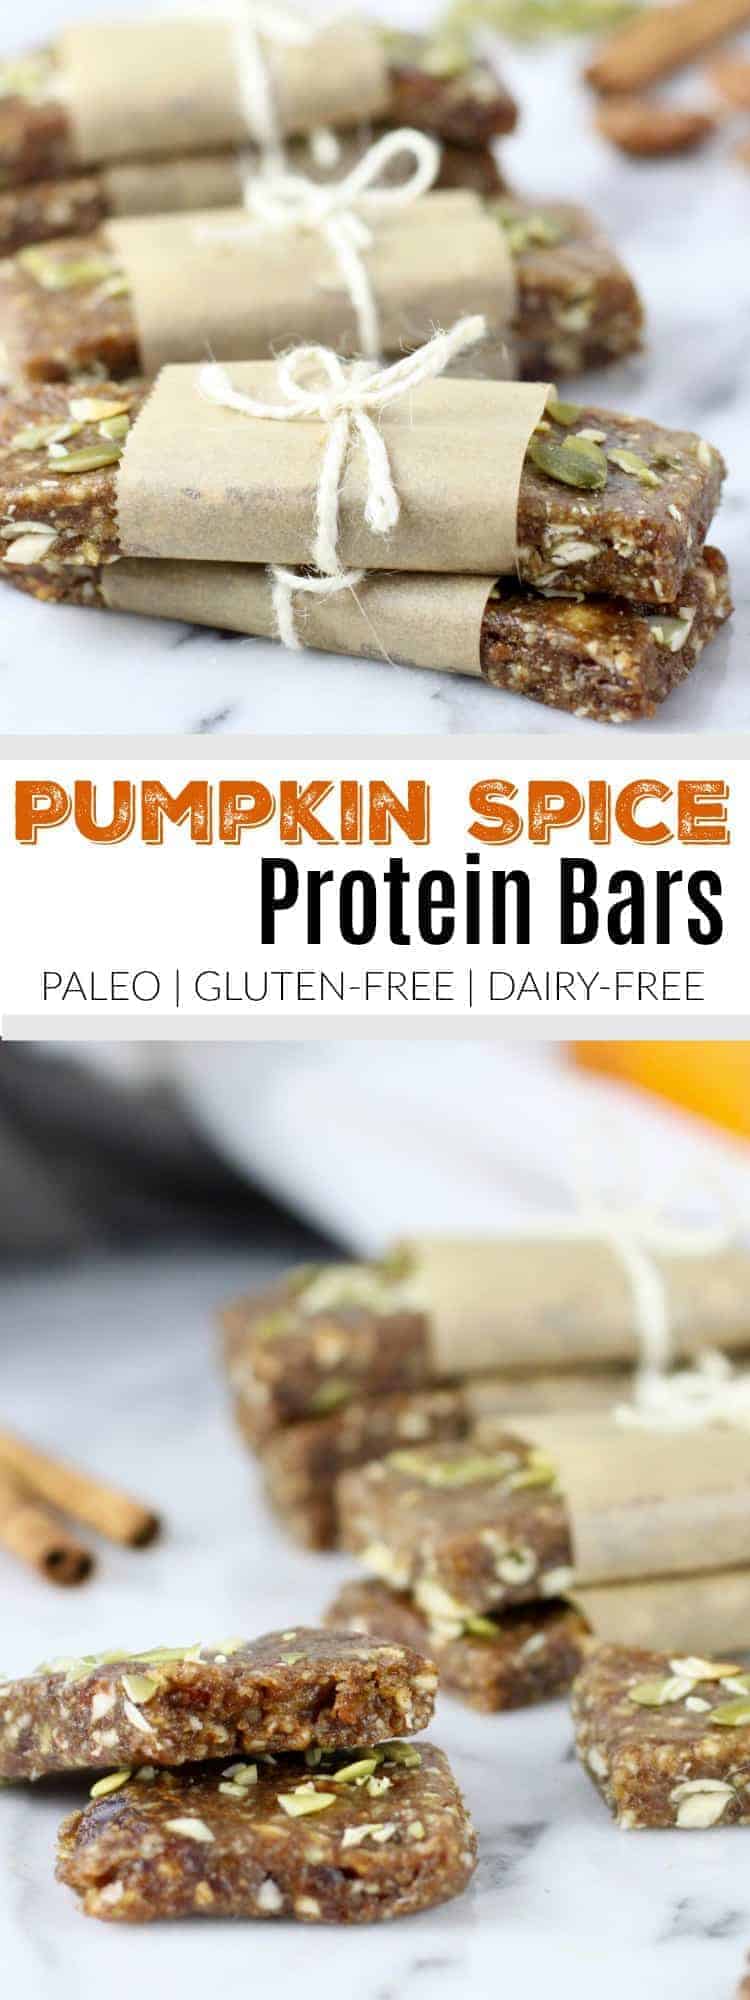 Pinterest image for Pumpkin Spice Protein Bars